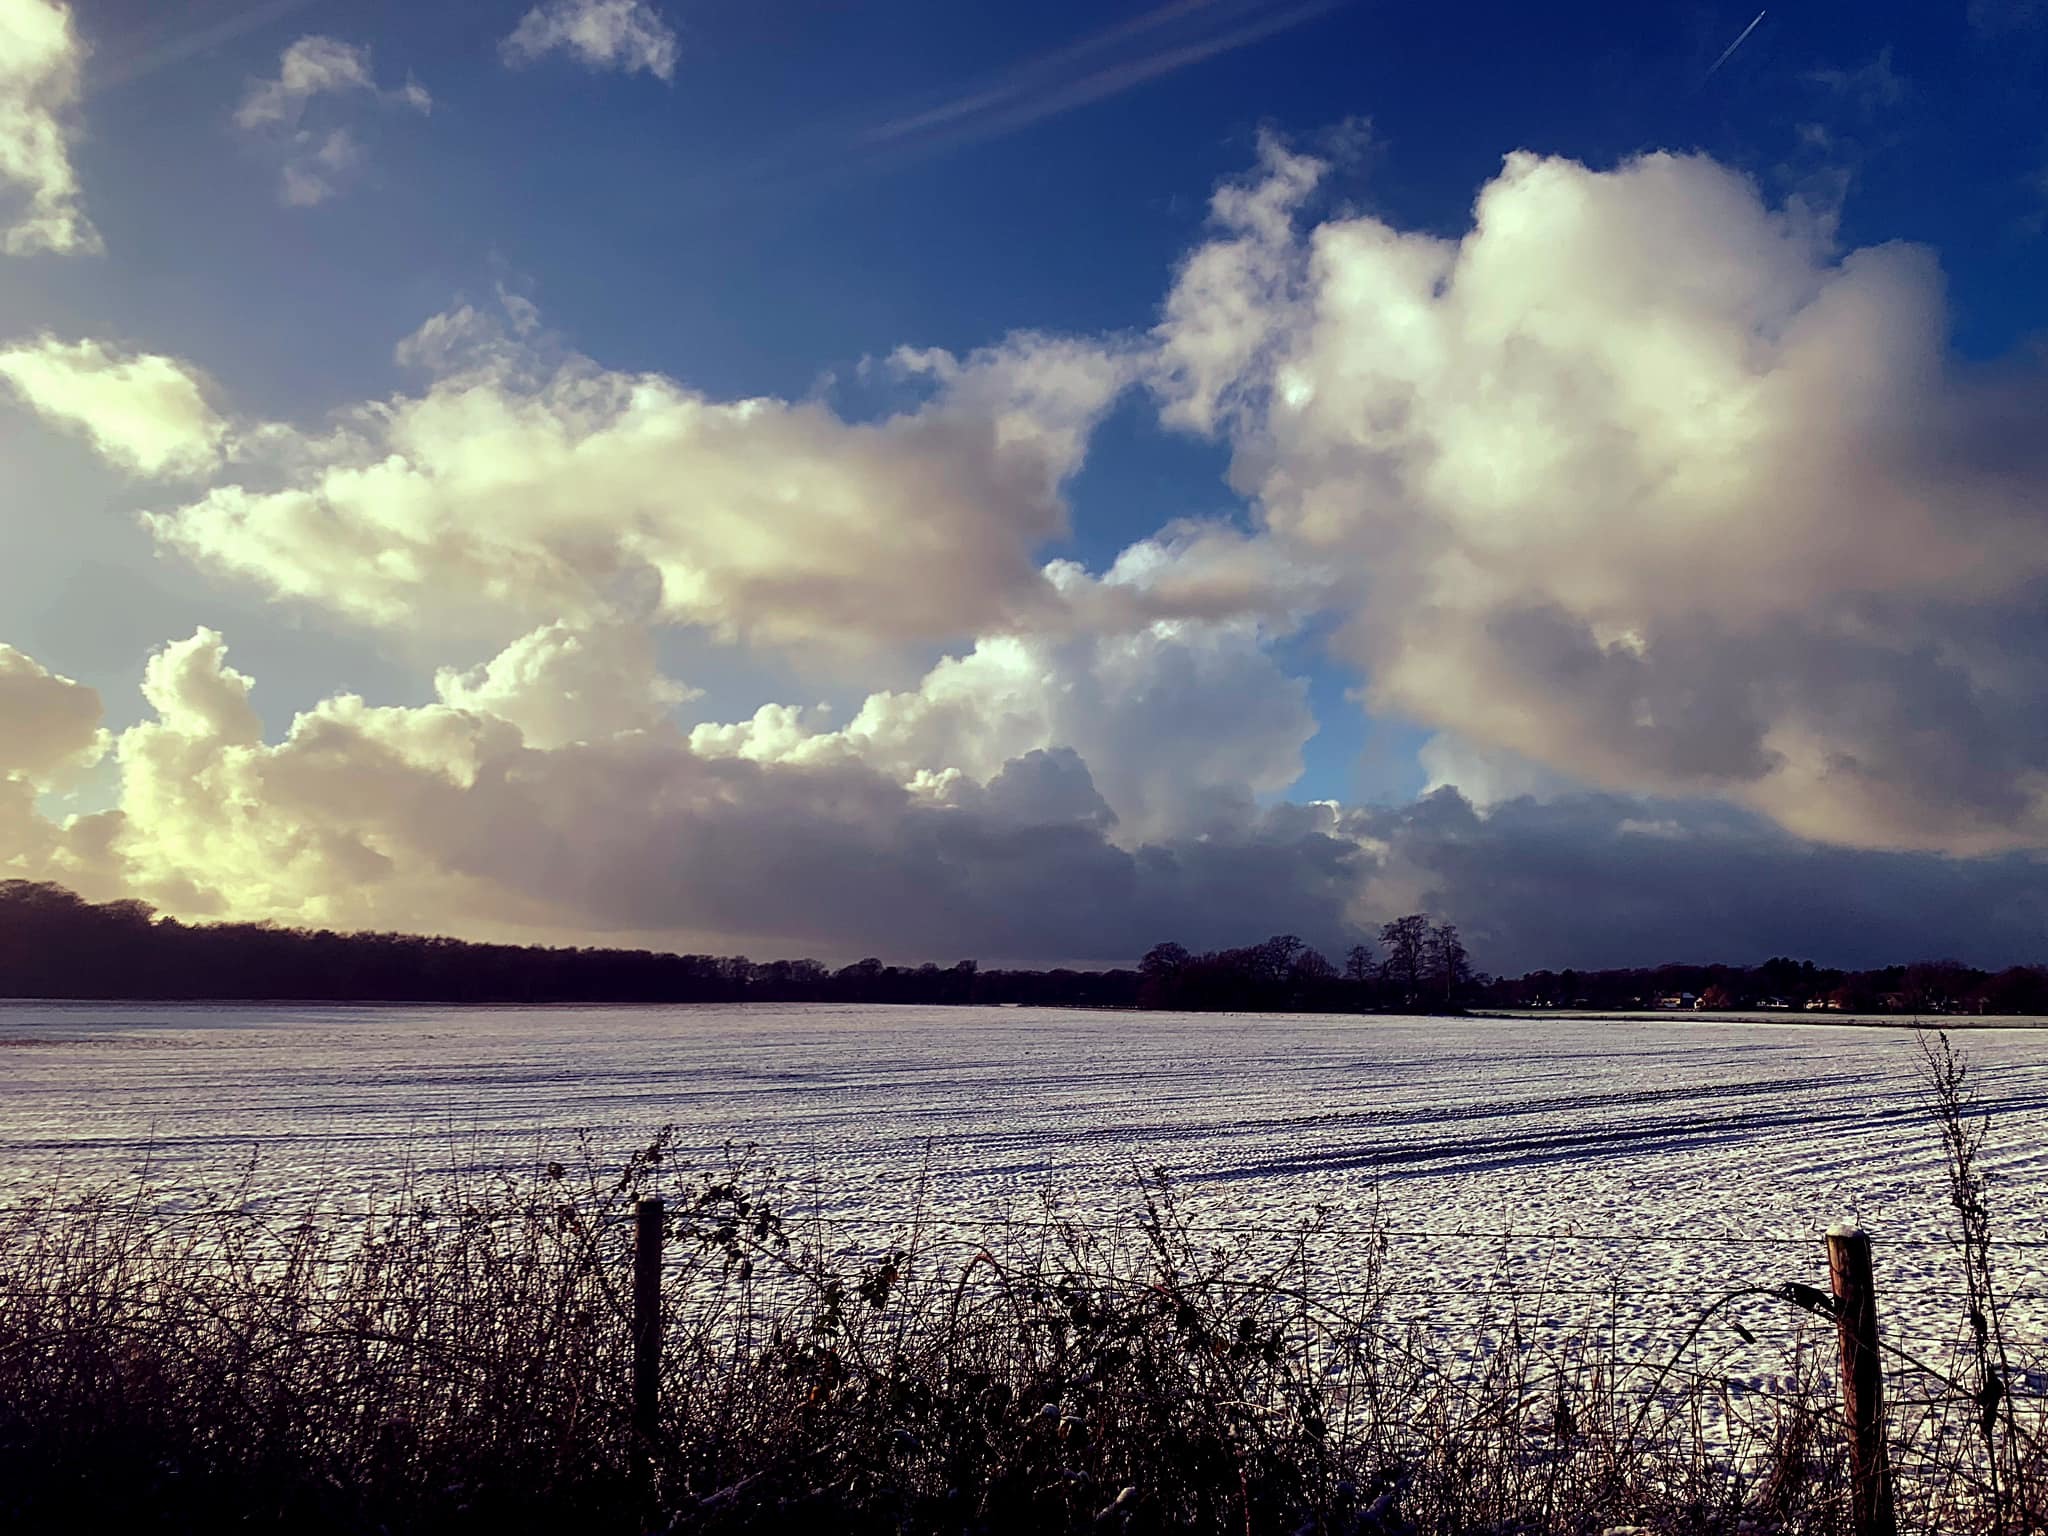 Snowy days and wintry skies in Knutsford by Carly Jo Curbishley